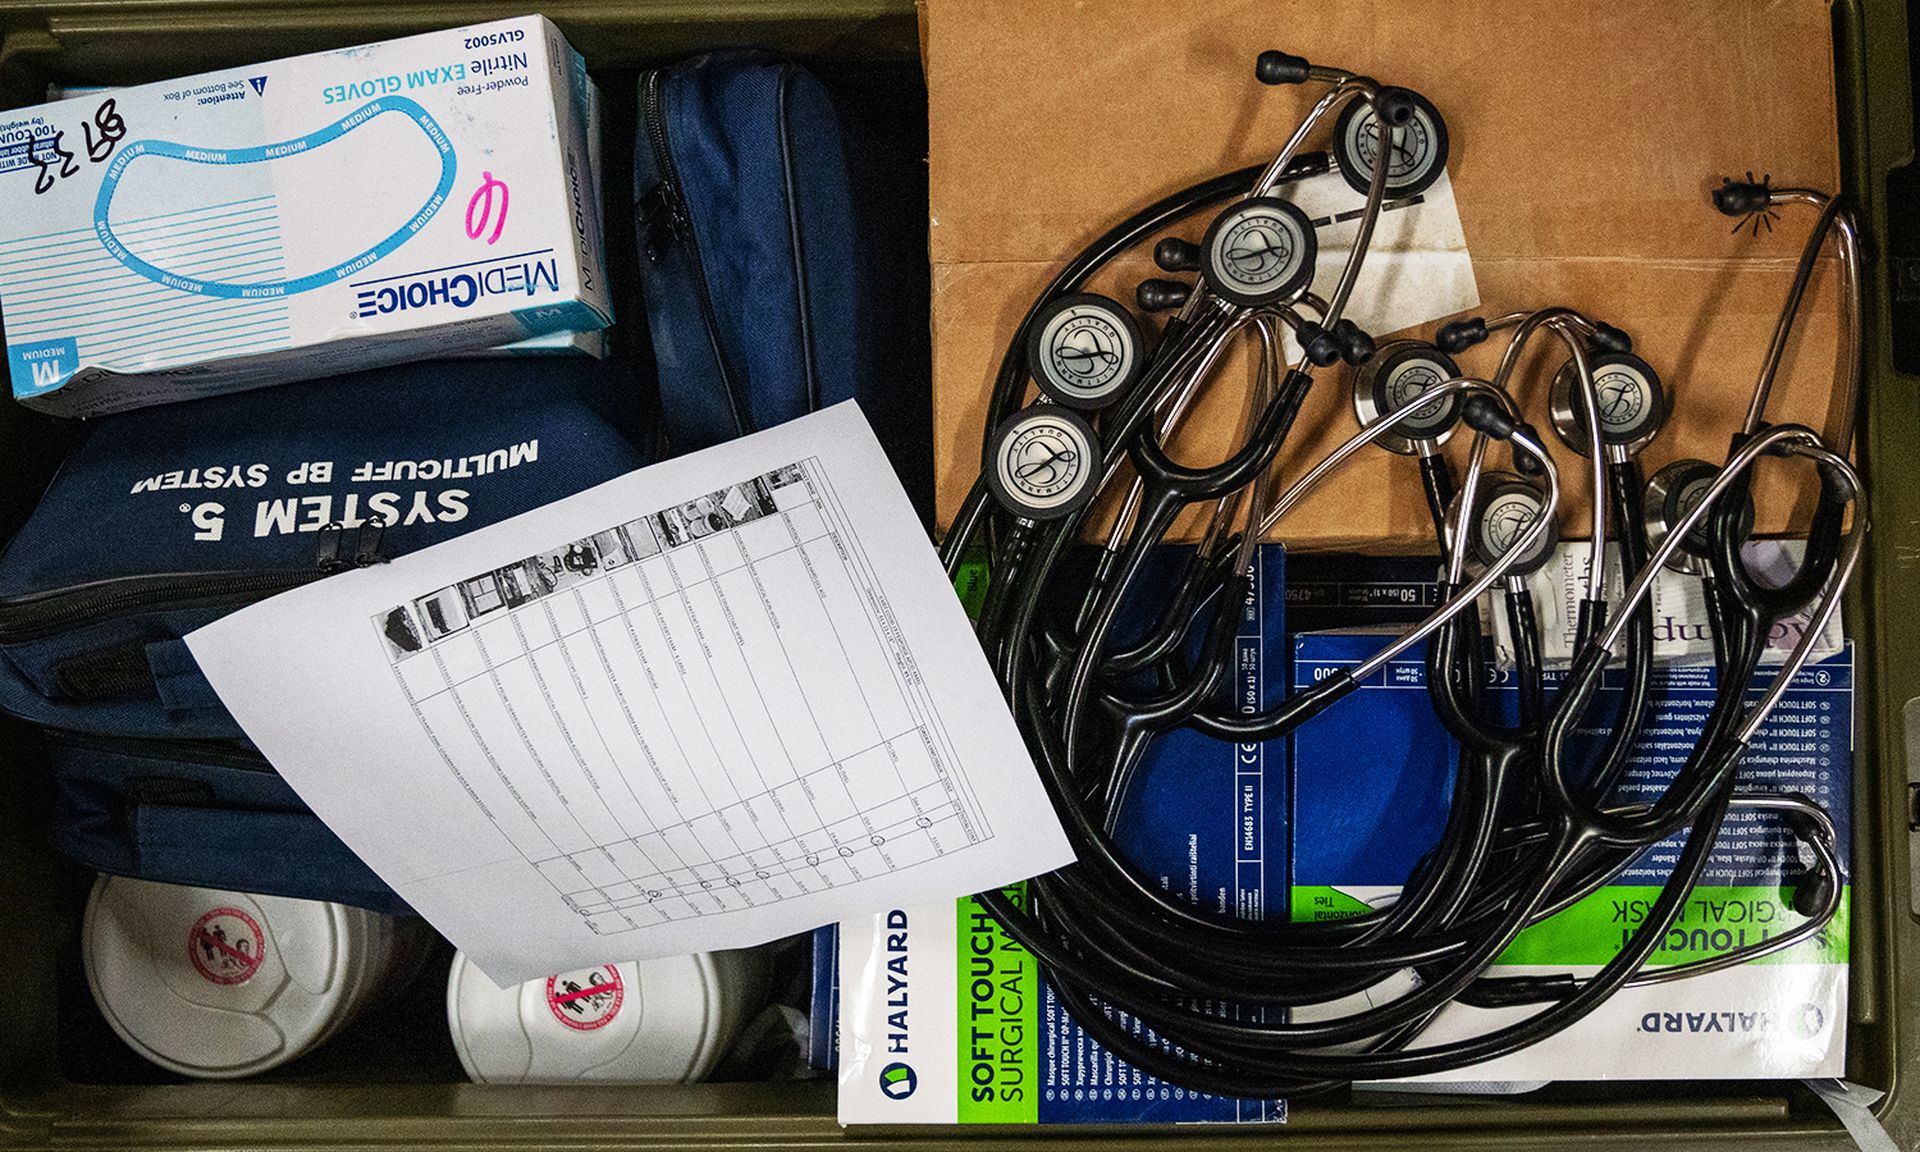 Several stethoscopes are seen as part of a medical kit